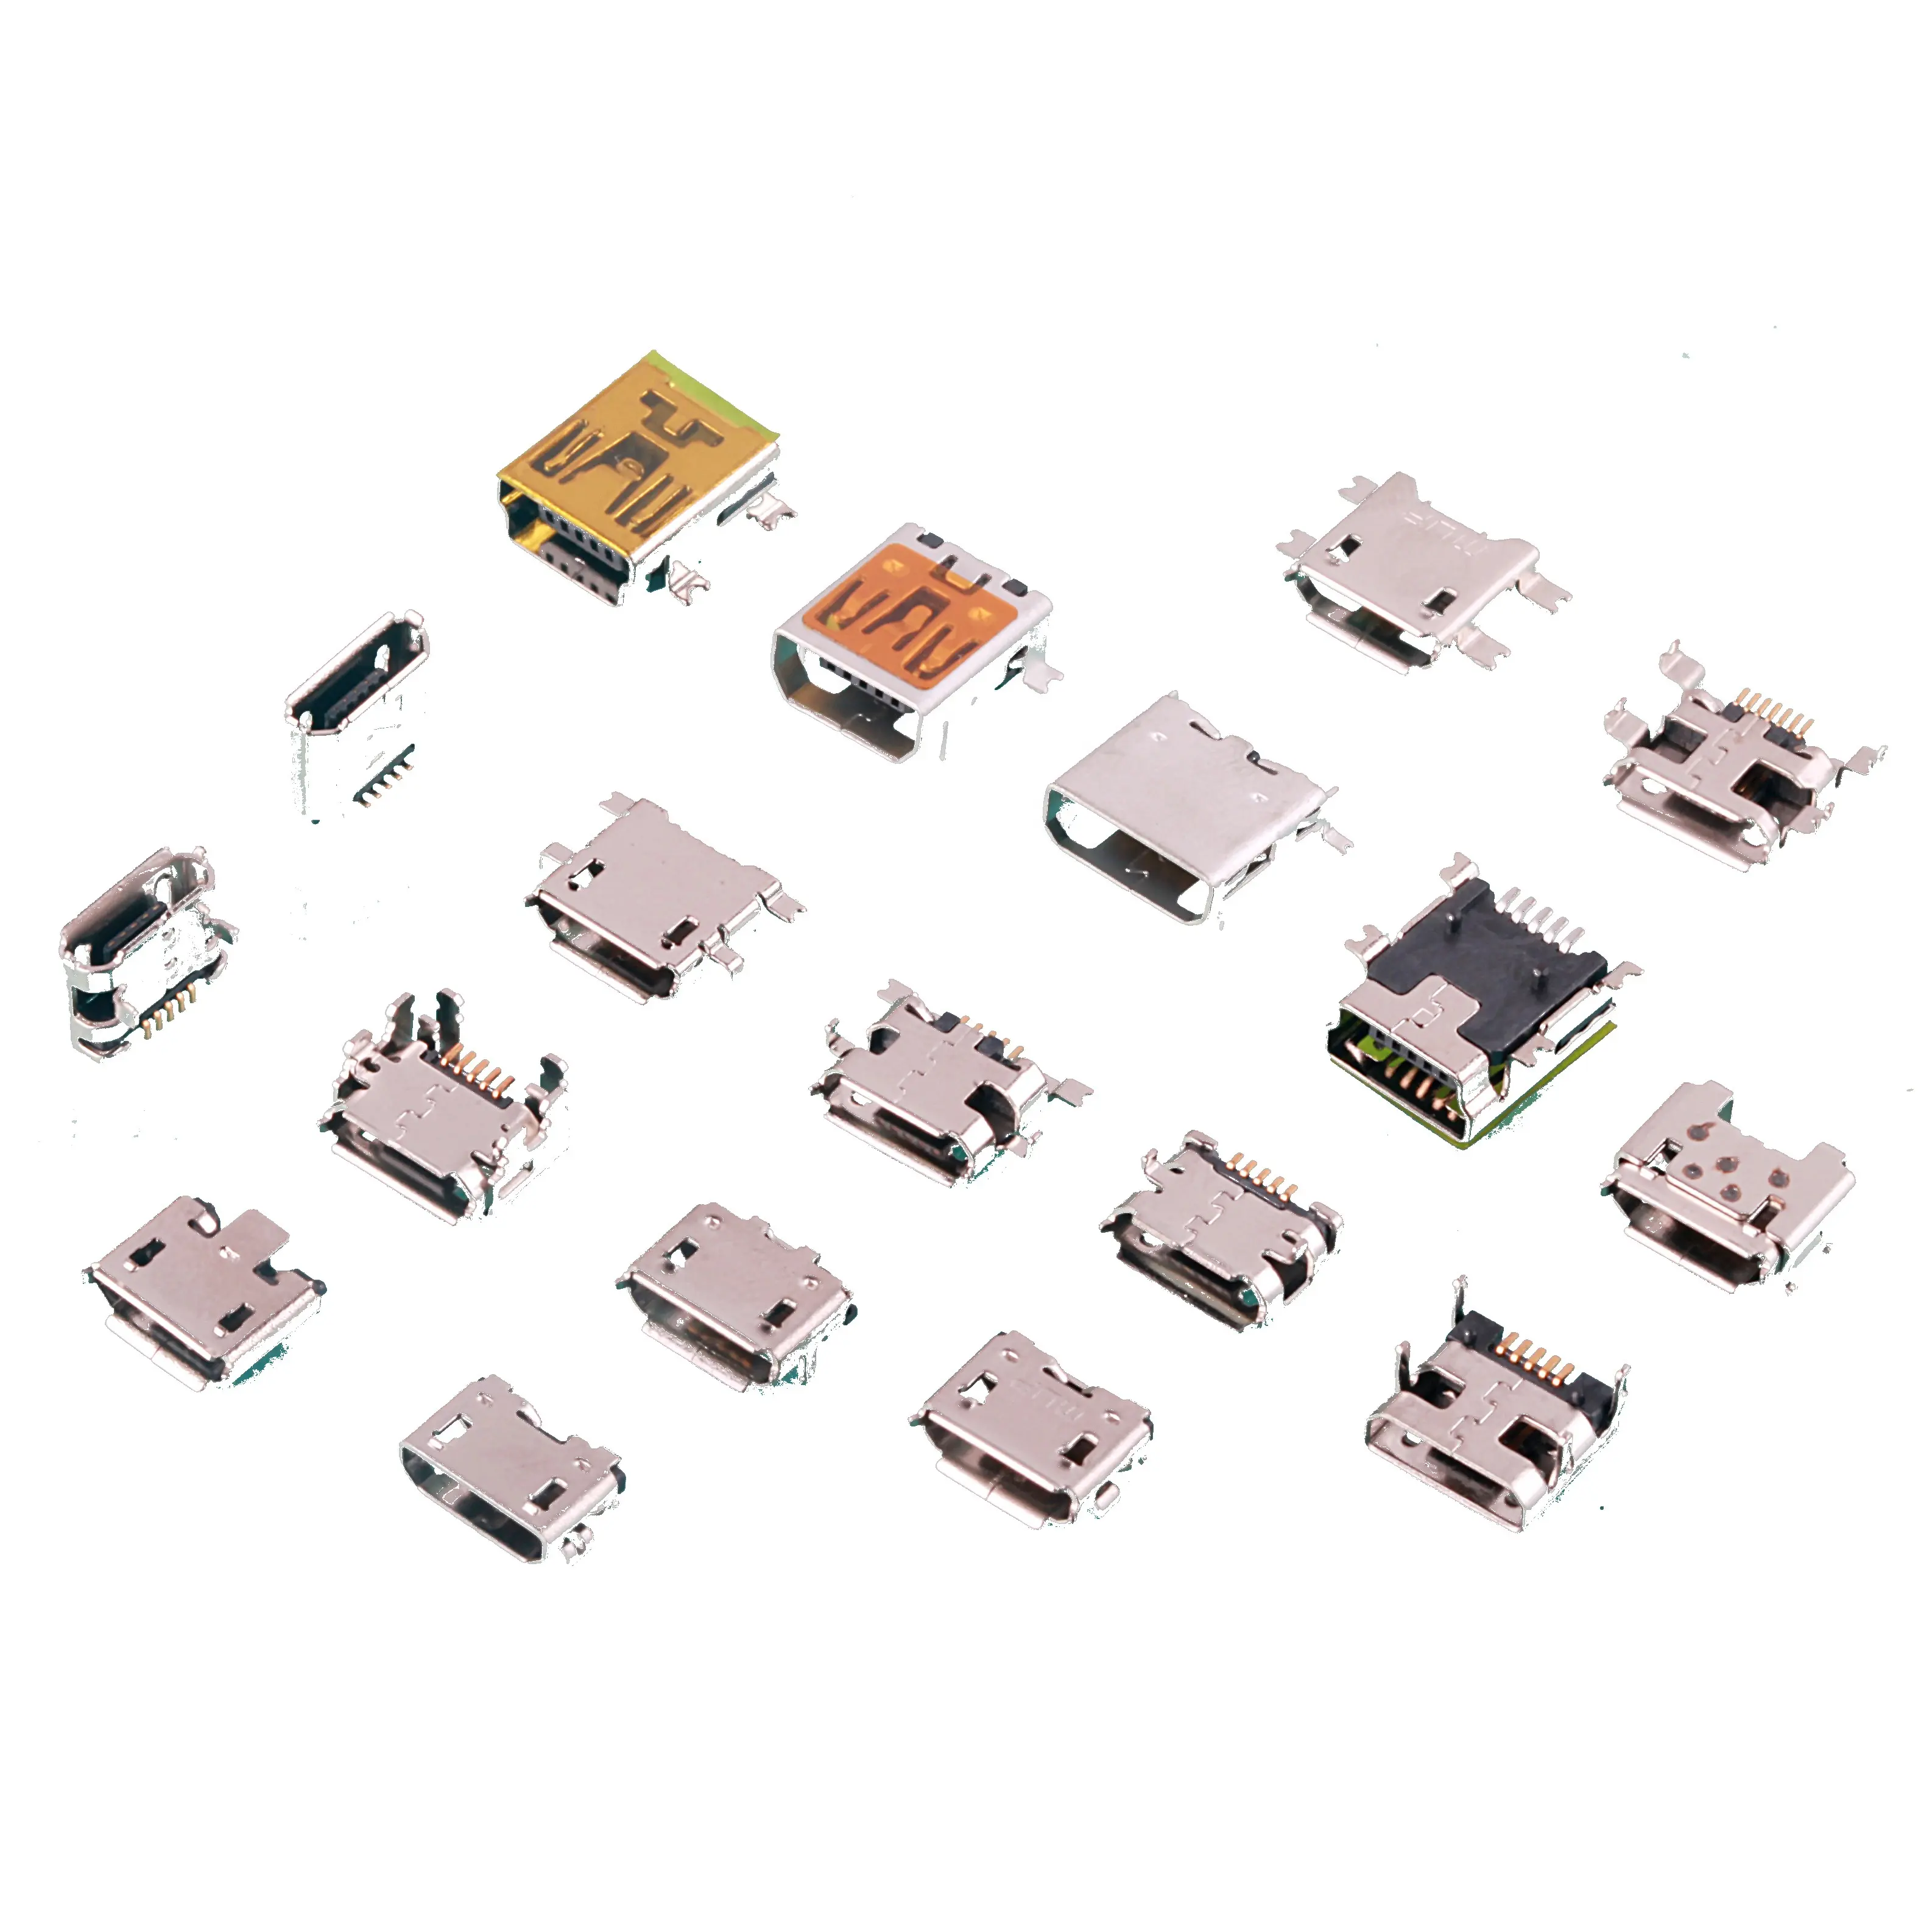 Mini USB female a b c type connector for mobile charging Micro sd USB socket connector adapter Waterproof connector ip67